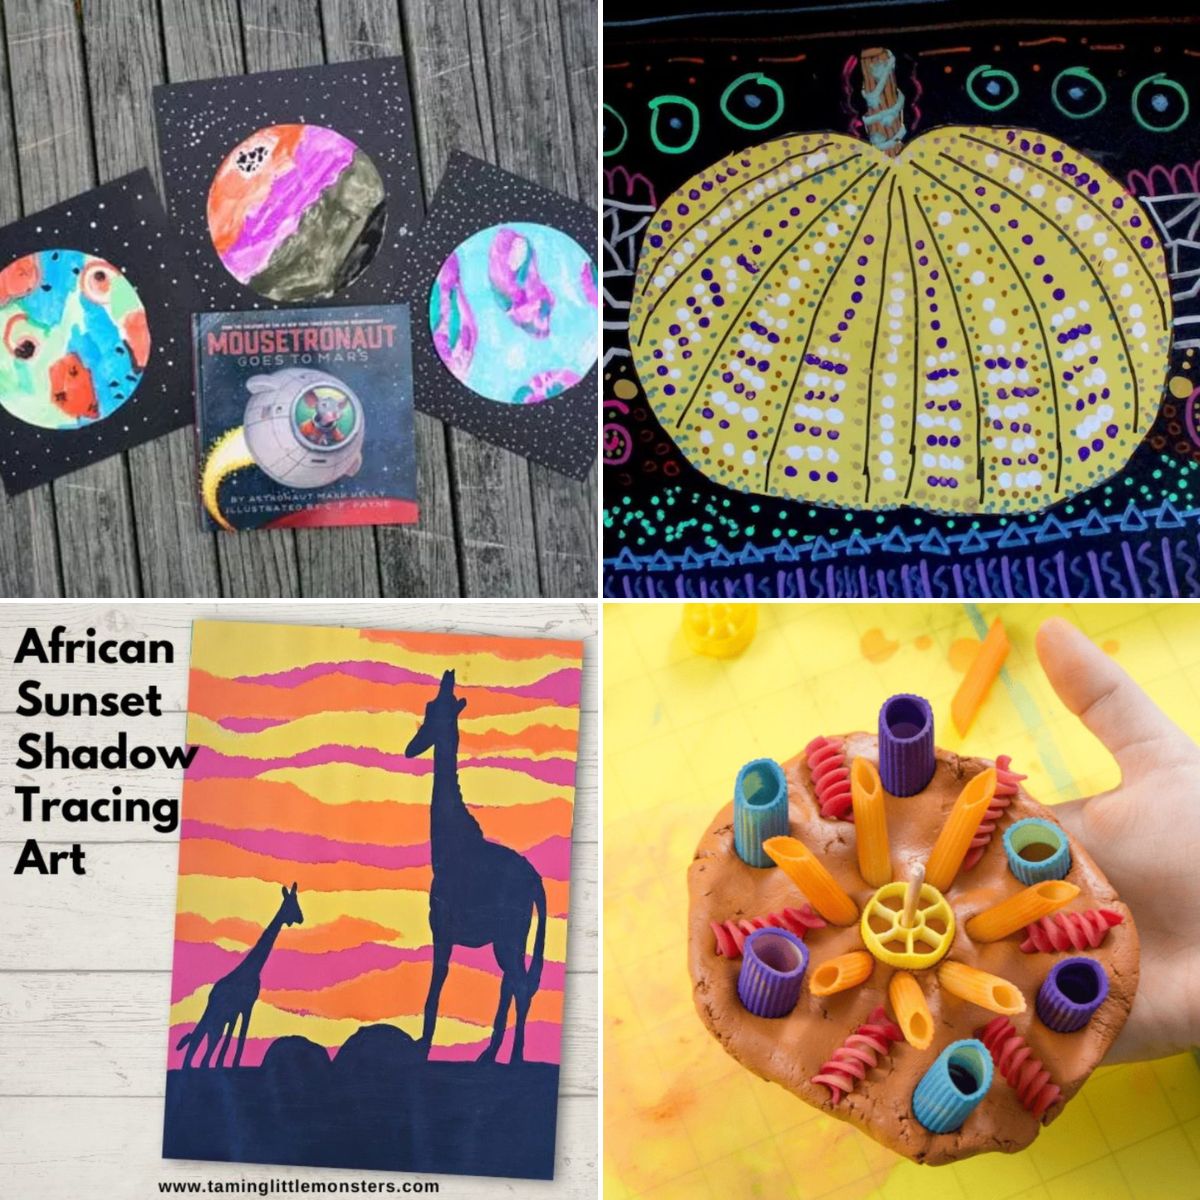 4 images of fascinating art projects for kids.